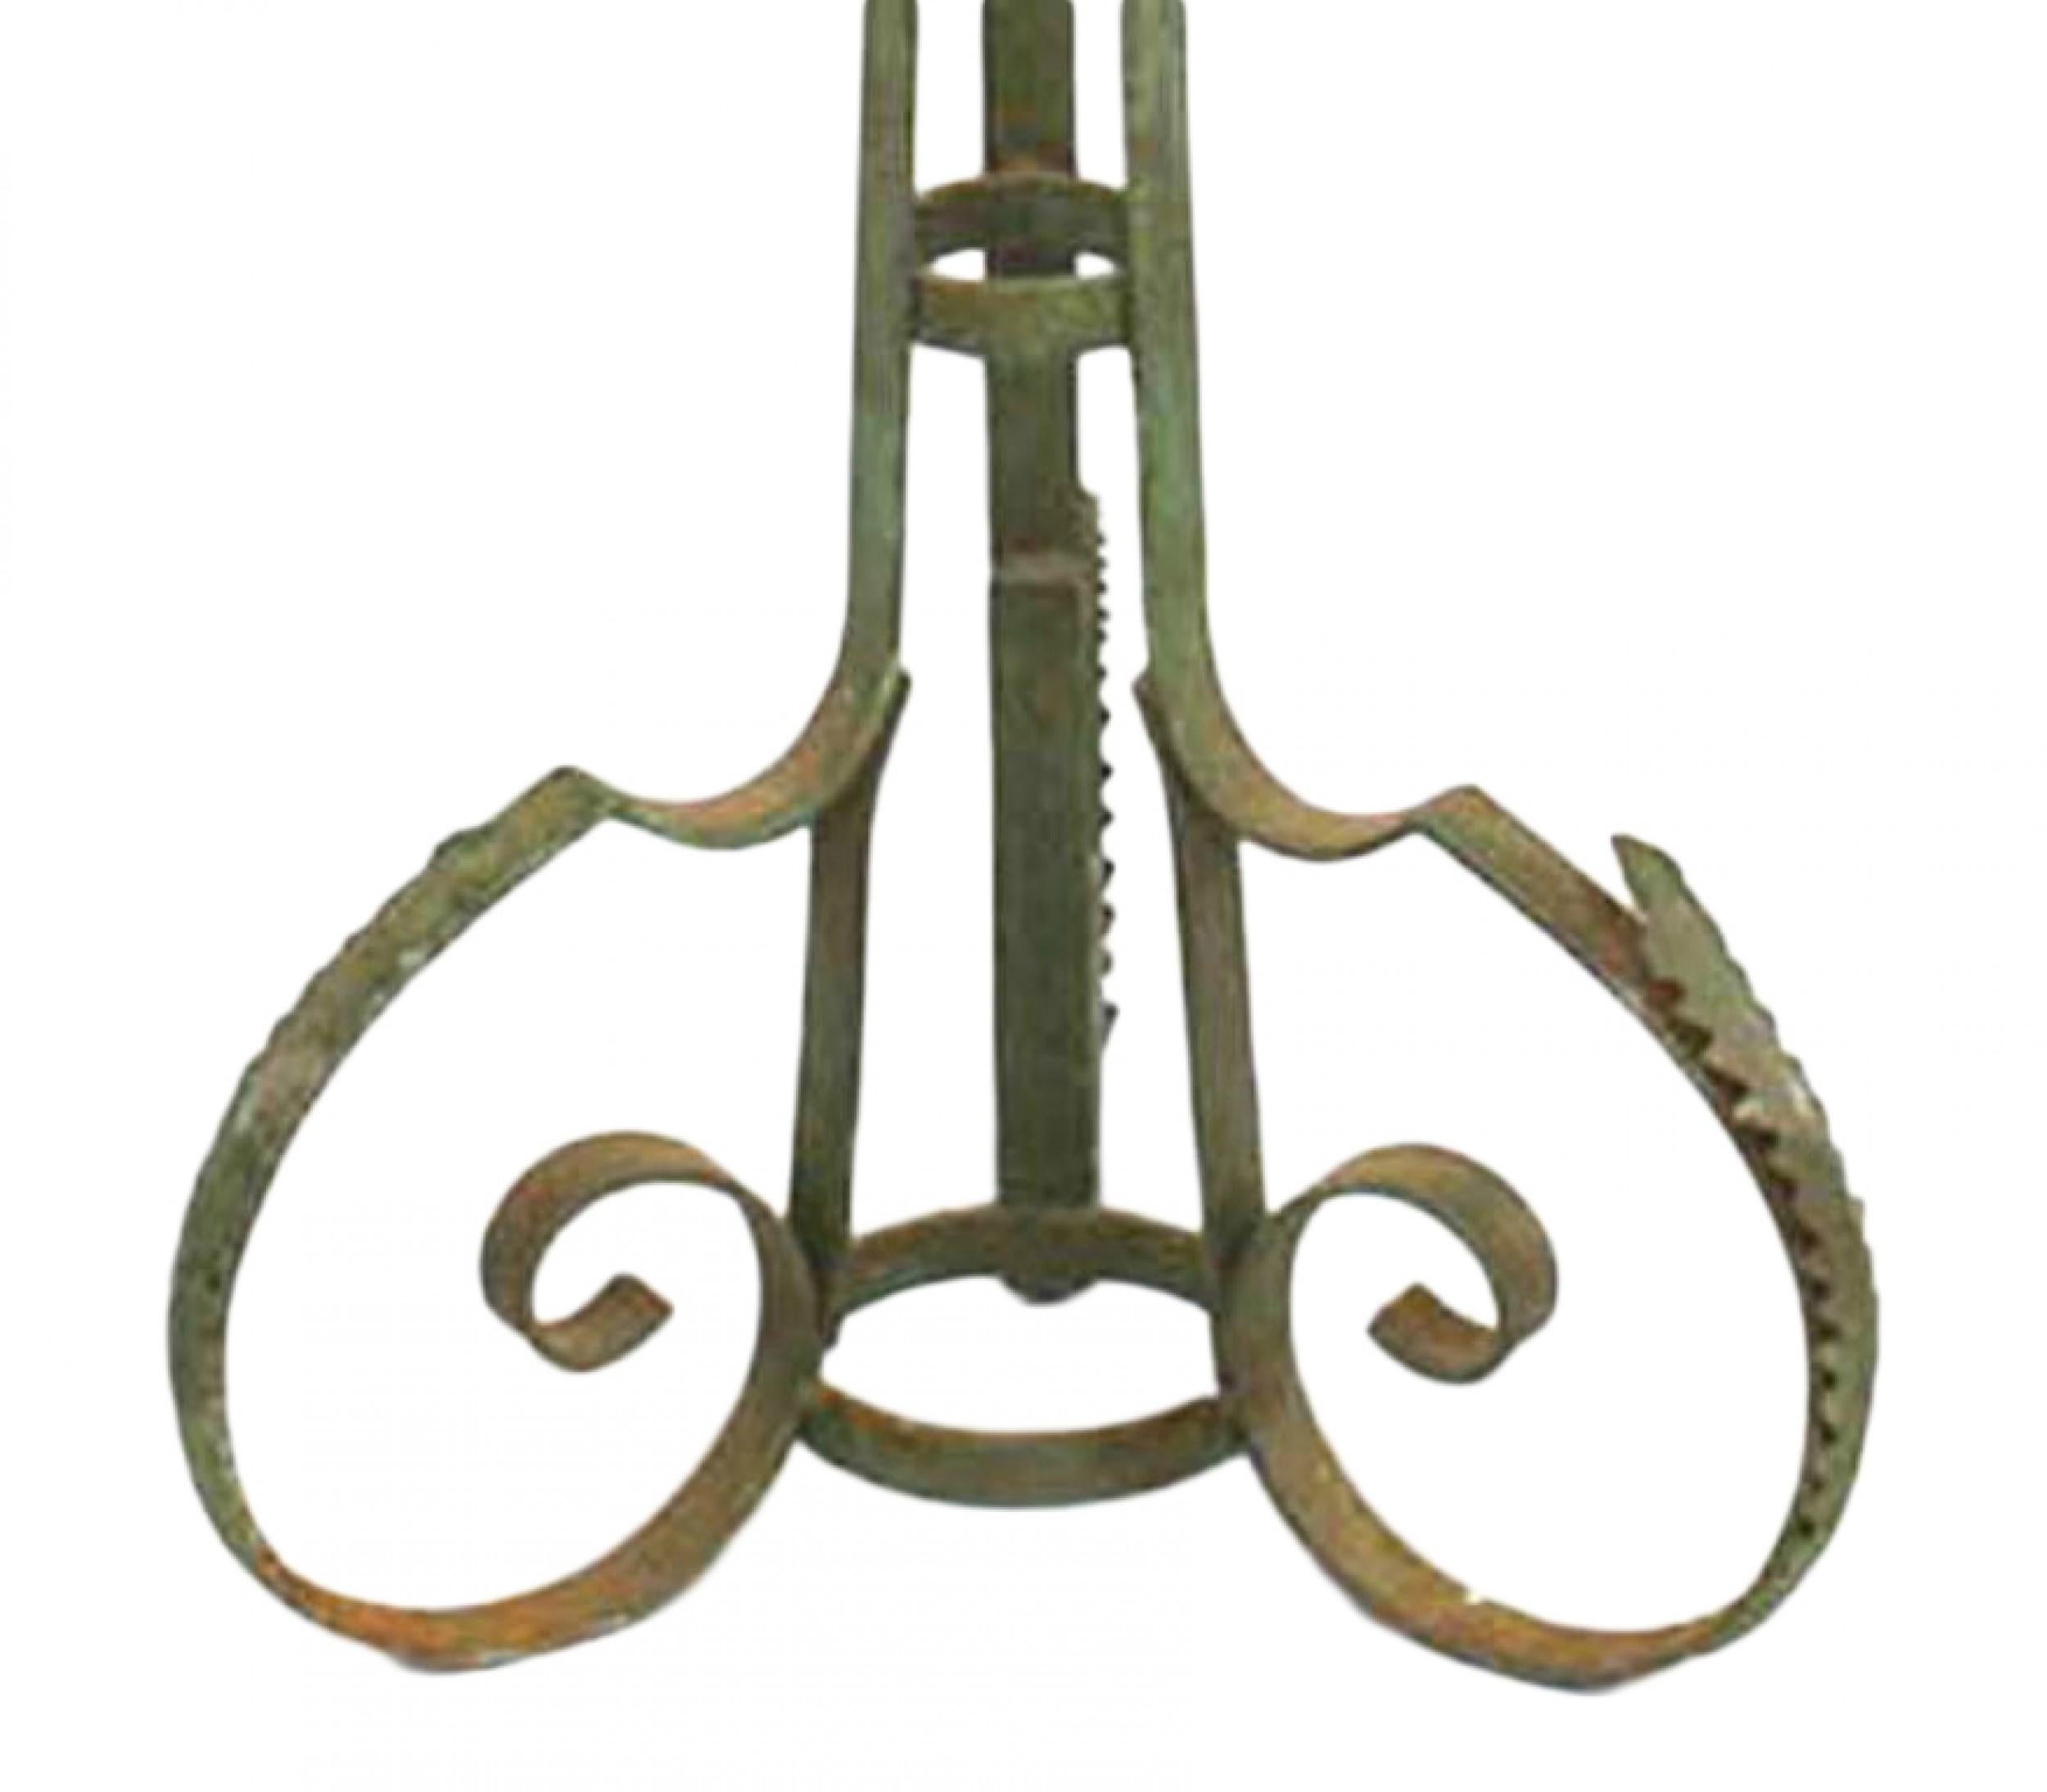 Renaissance Revival Pair of English Renaissance Patinated Wrought Iron Floor Torchieres For Sale